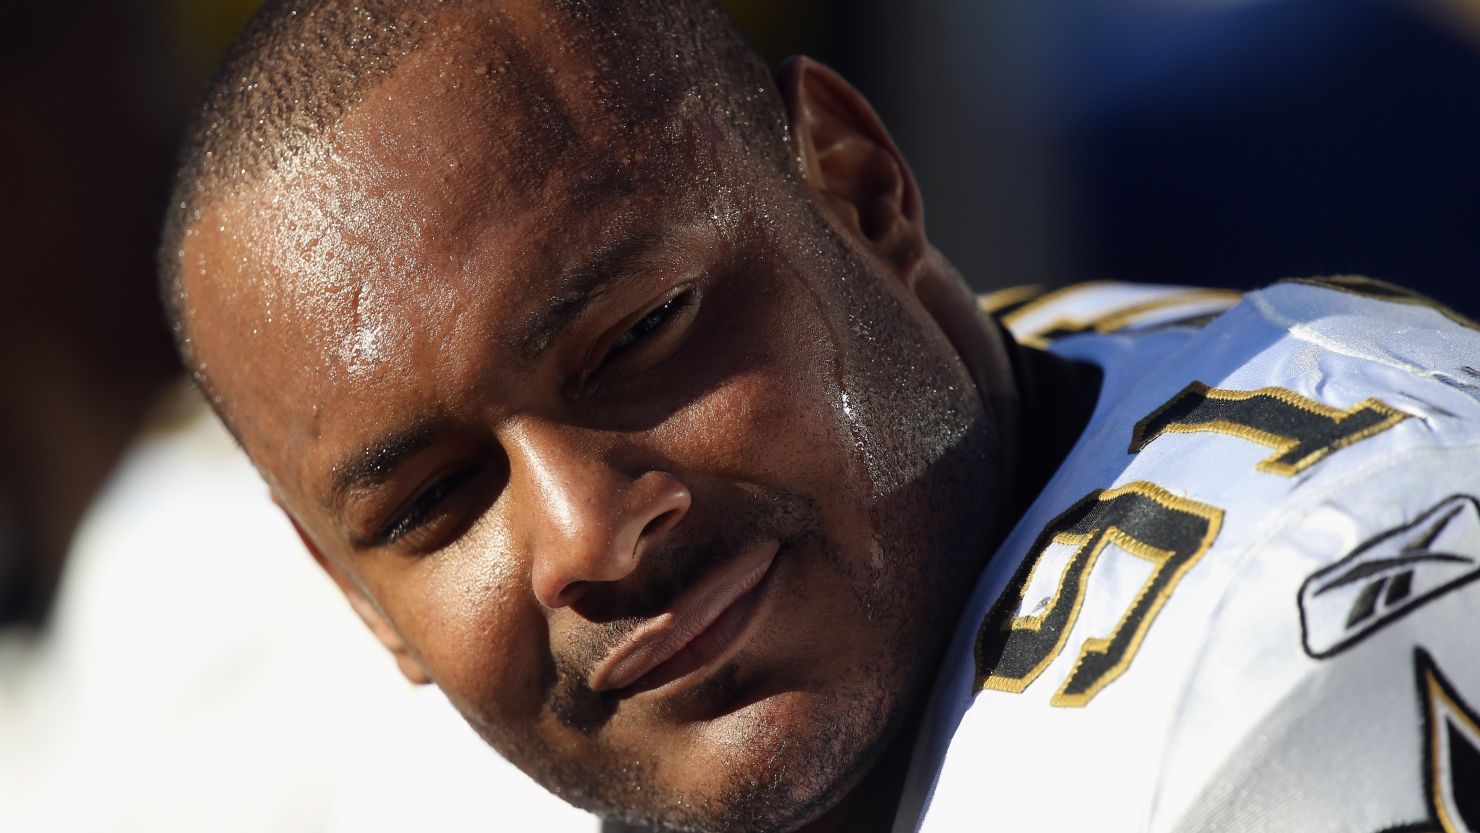 More than a week after former New Orleans Saints defensive end Will Smith was shot dead, police are still investigating.